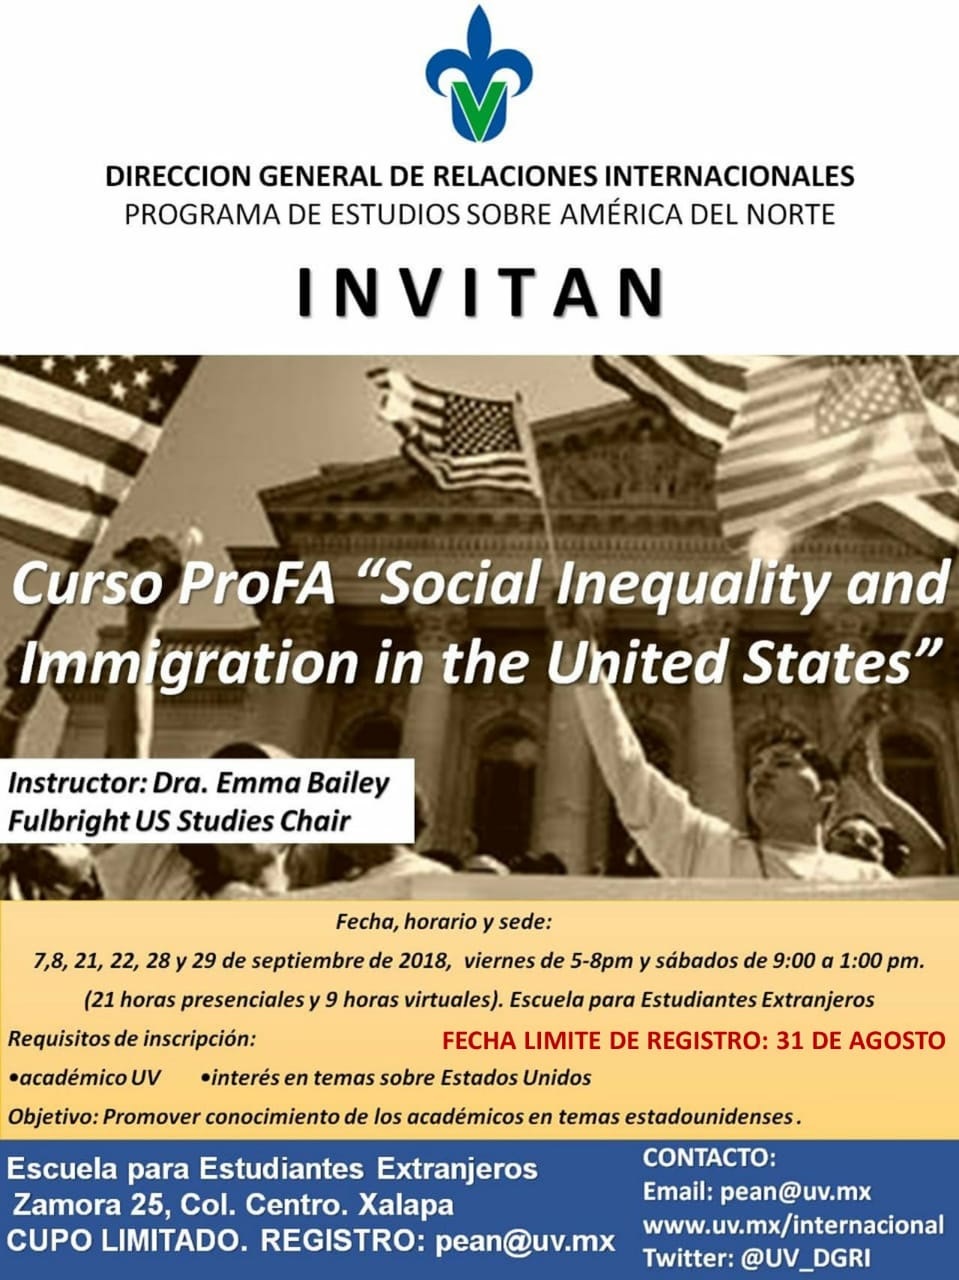 Cartel - curso profa “social inequality and immigration in the united states”